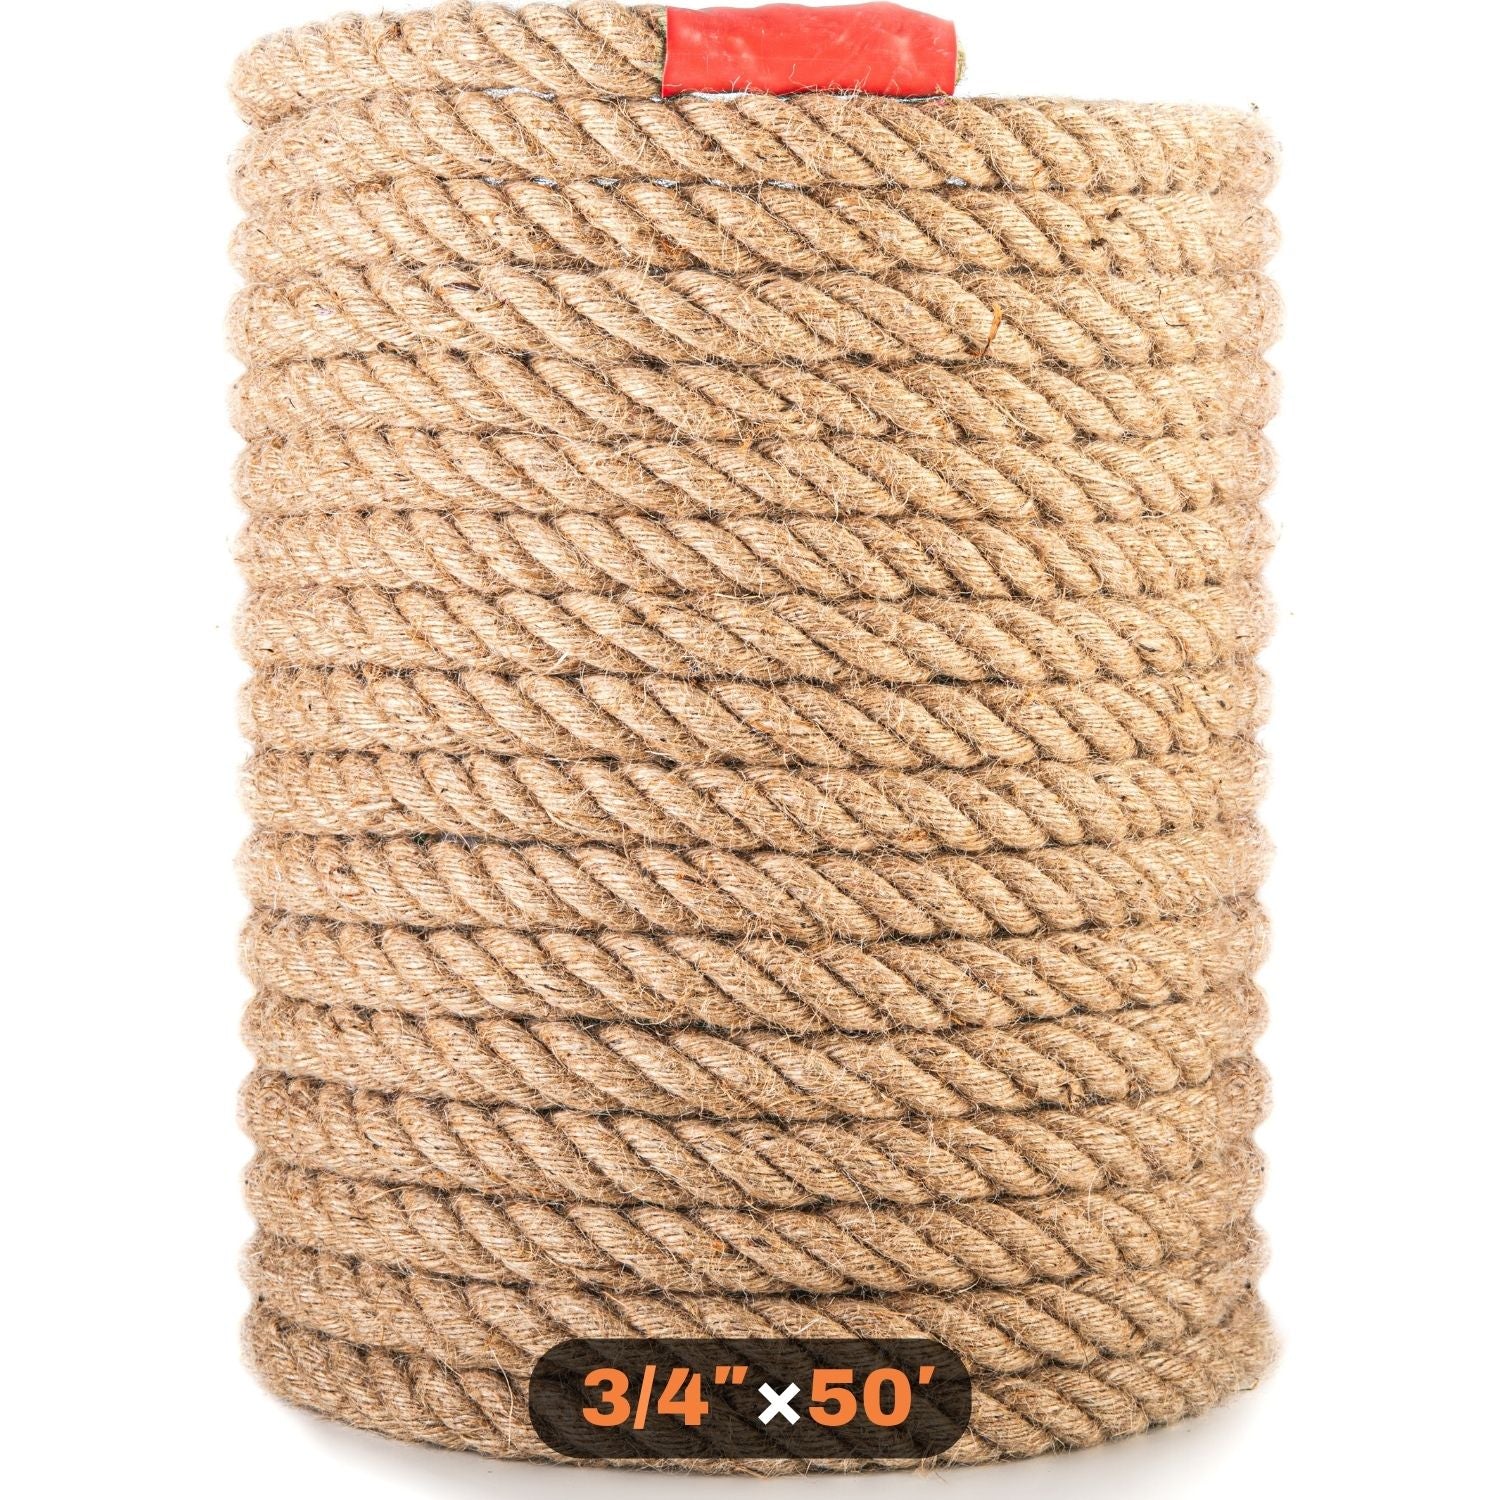 Twisted Cotton Rope (1 in x 10 ft) Natural Thick White Rope for Nautical,  Landscaping, Railings, Hammock,Home Decorating